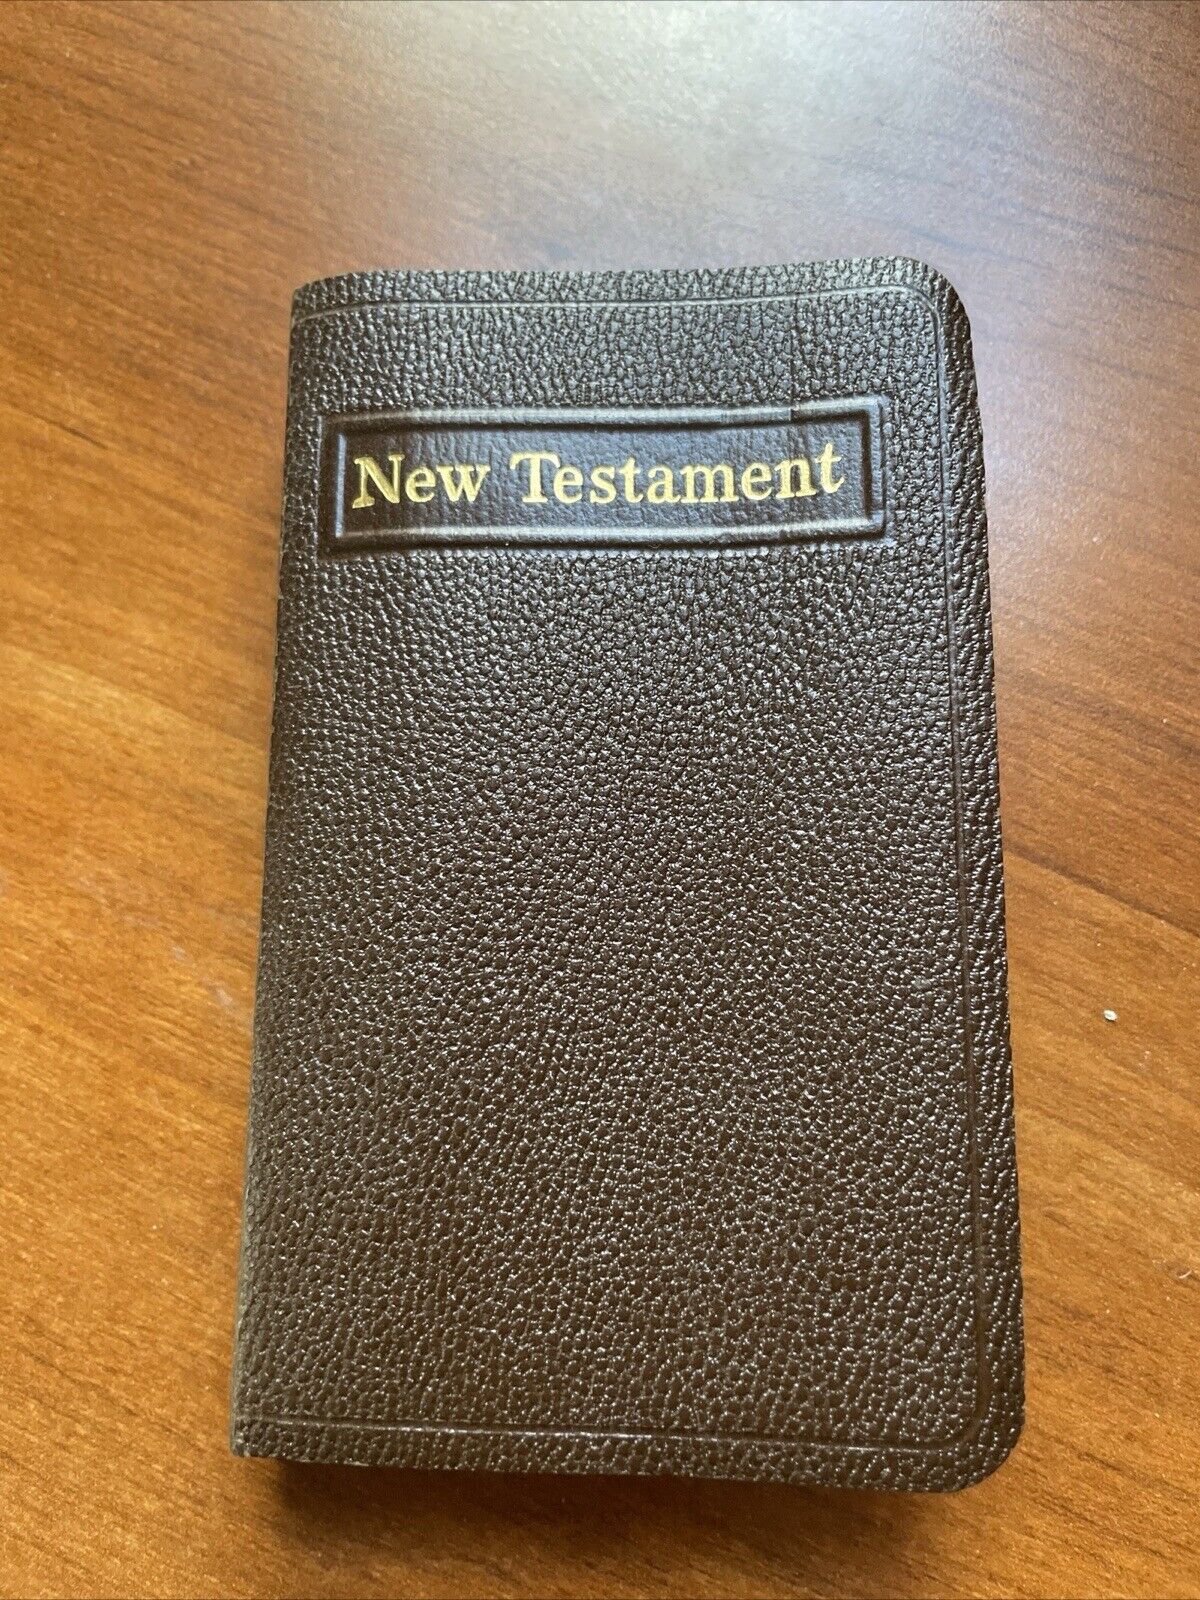 WW2 US Army Military Pocket Roman Protestant New Testament Bible Holy Scripture